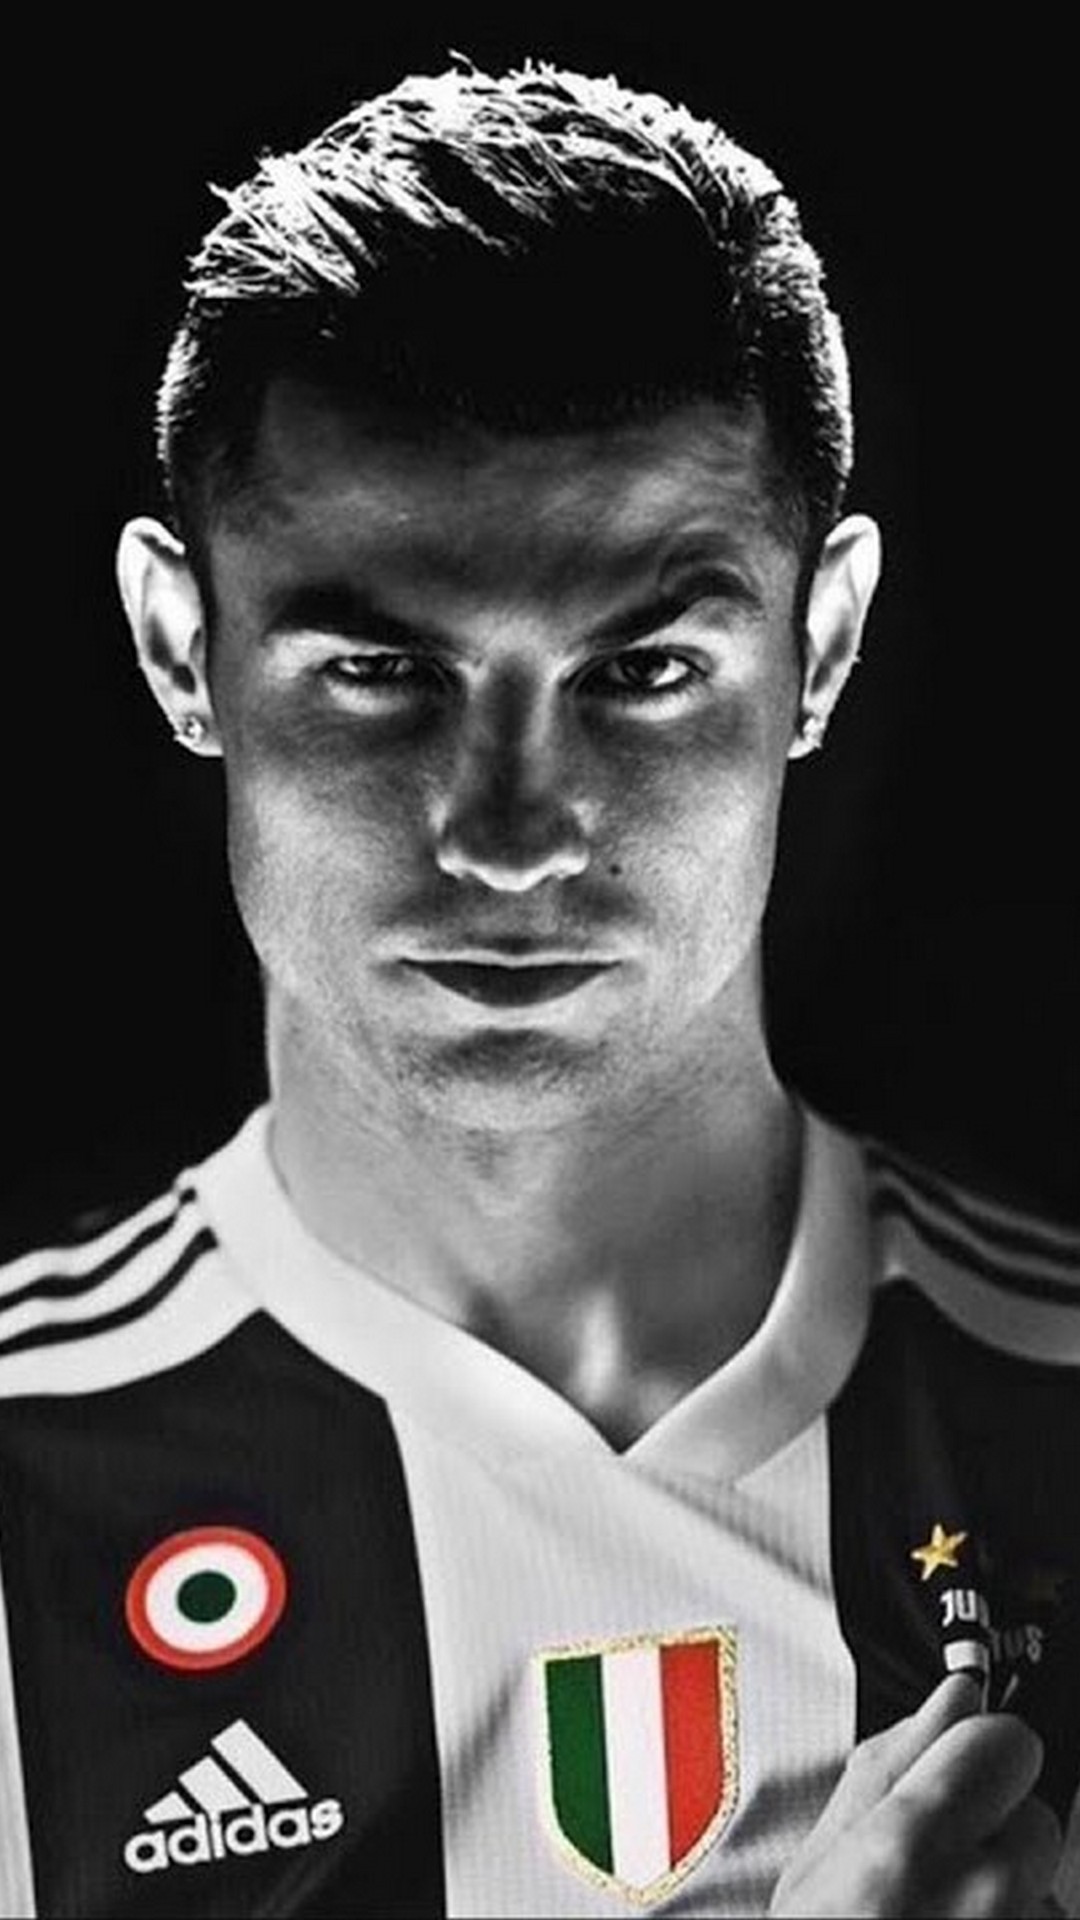 C Ronaldo Juventus Wallpaper iPhone with image resolution 1080x1920 pixel. You can make this wallpaper for your iPhone 5, 6, 7, 8, X backgrounds, Mobile Screensaver, or iPad Lock Screen